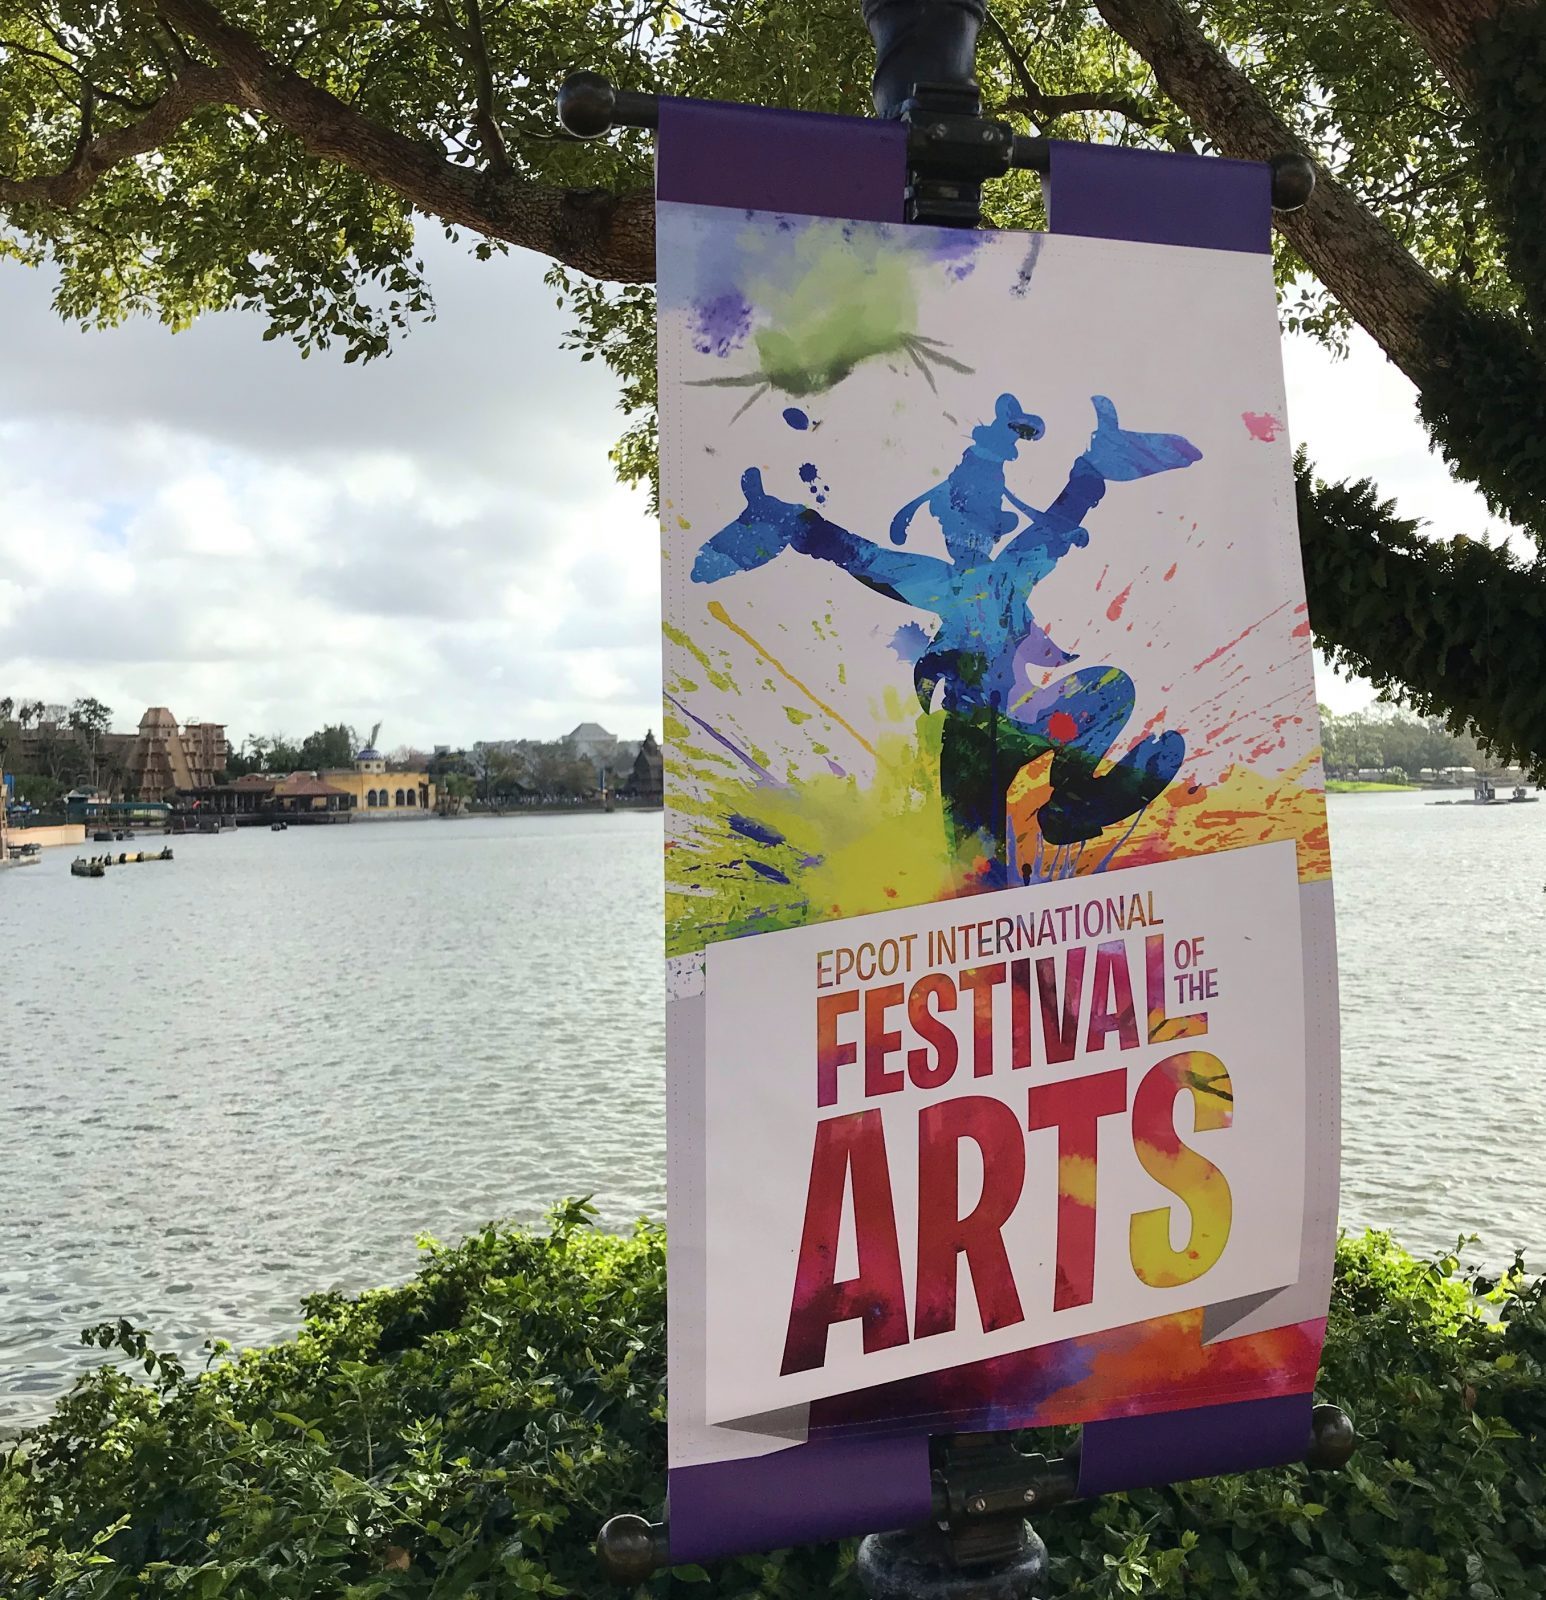 Festival of the Arts sign in epcot